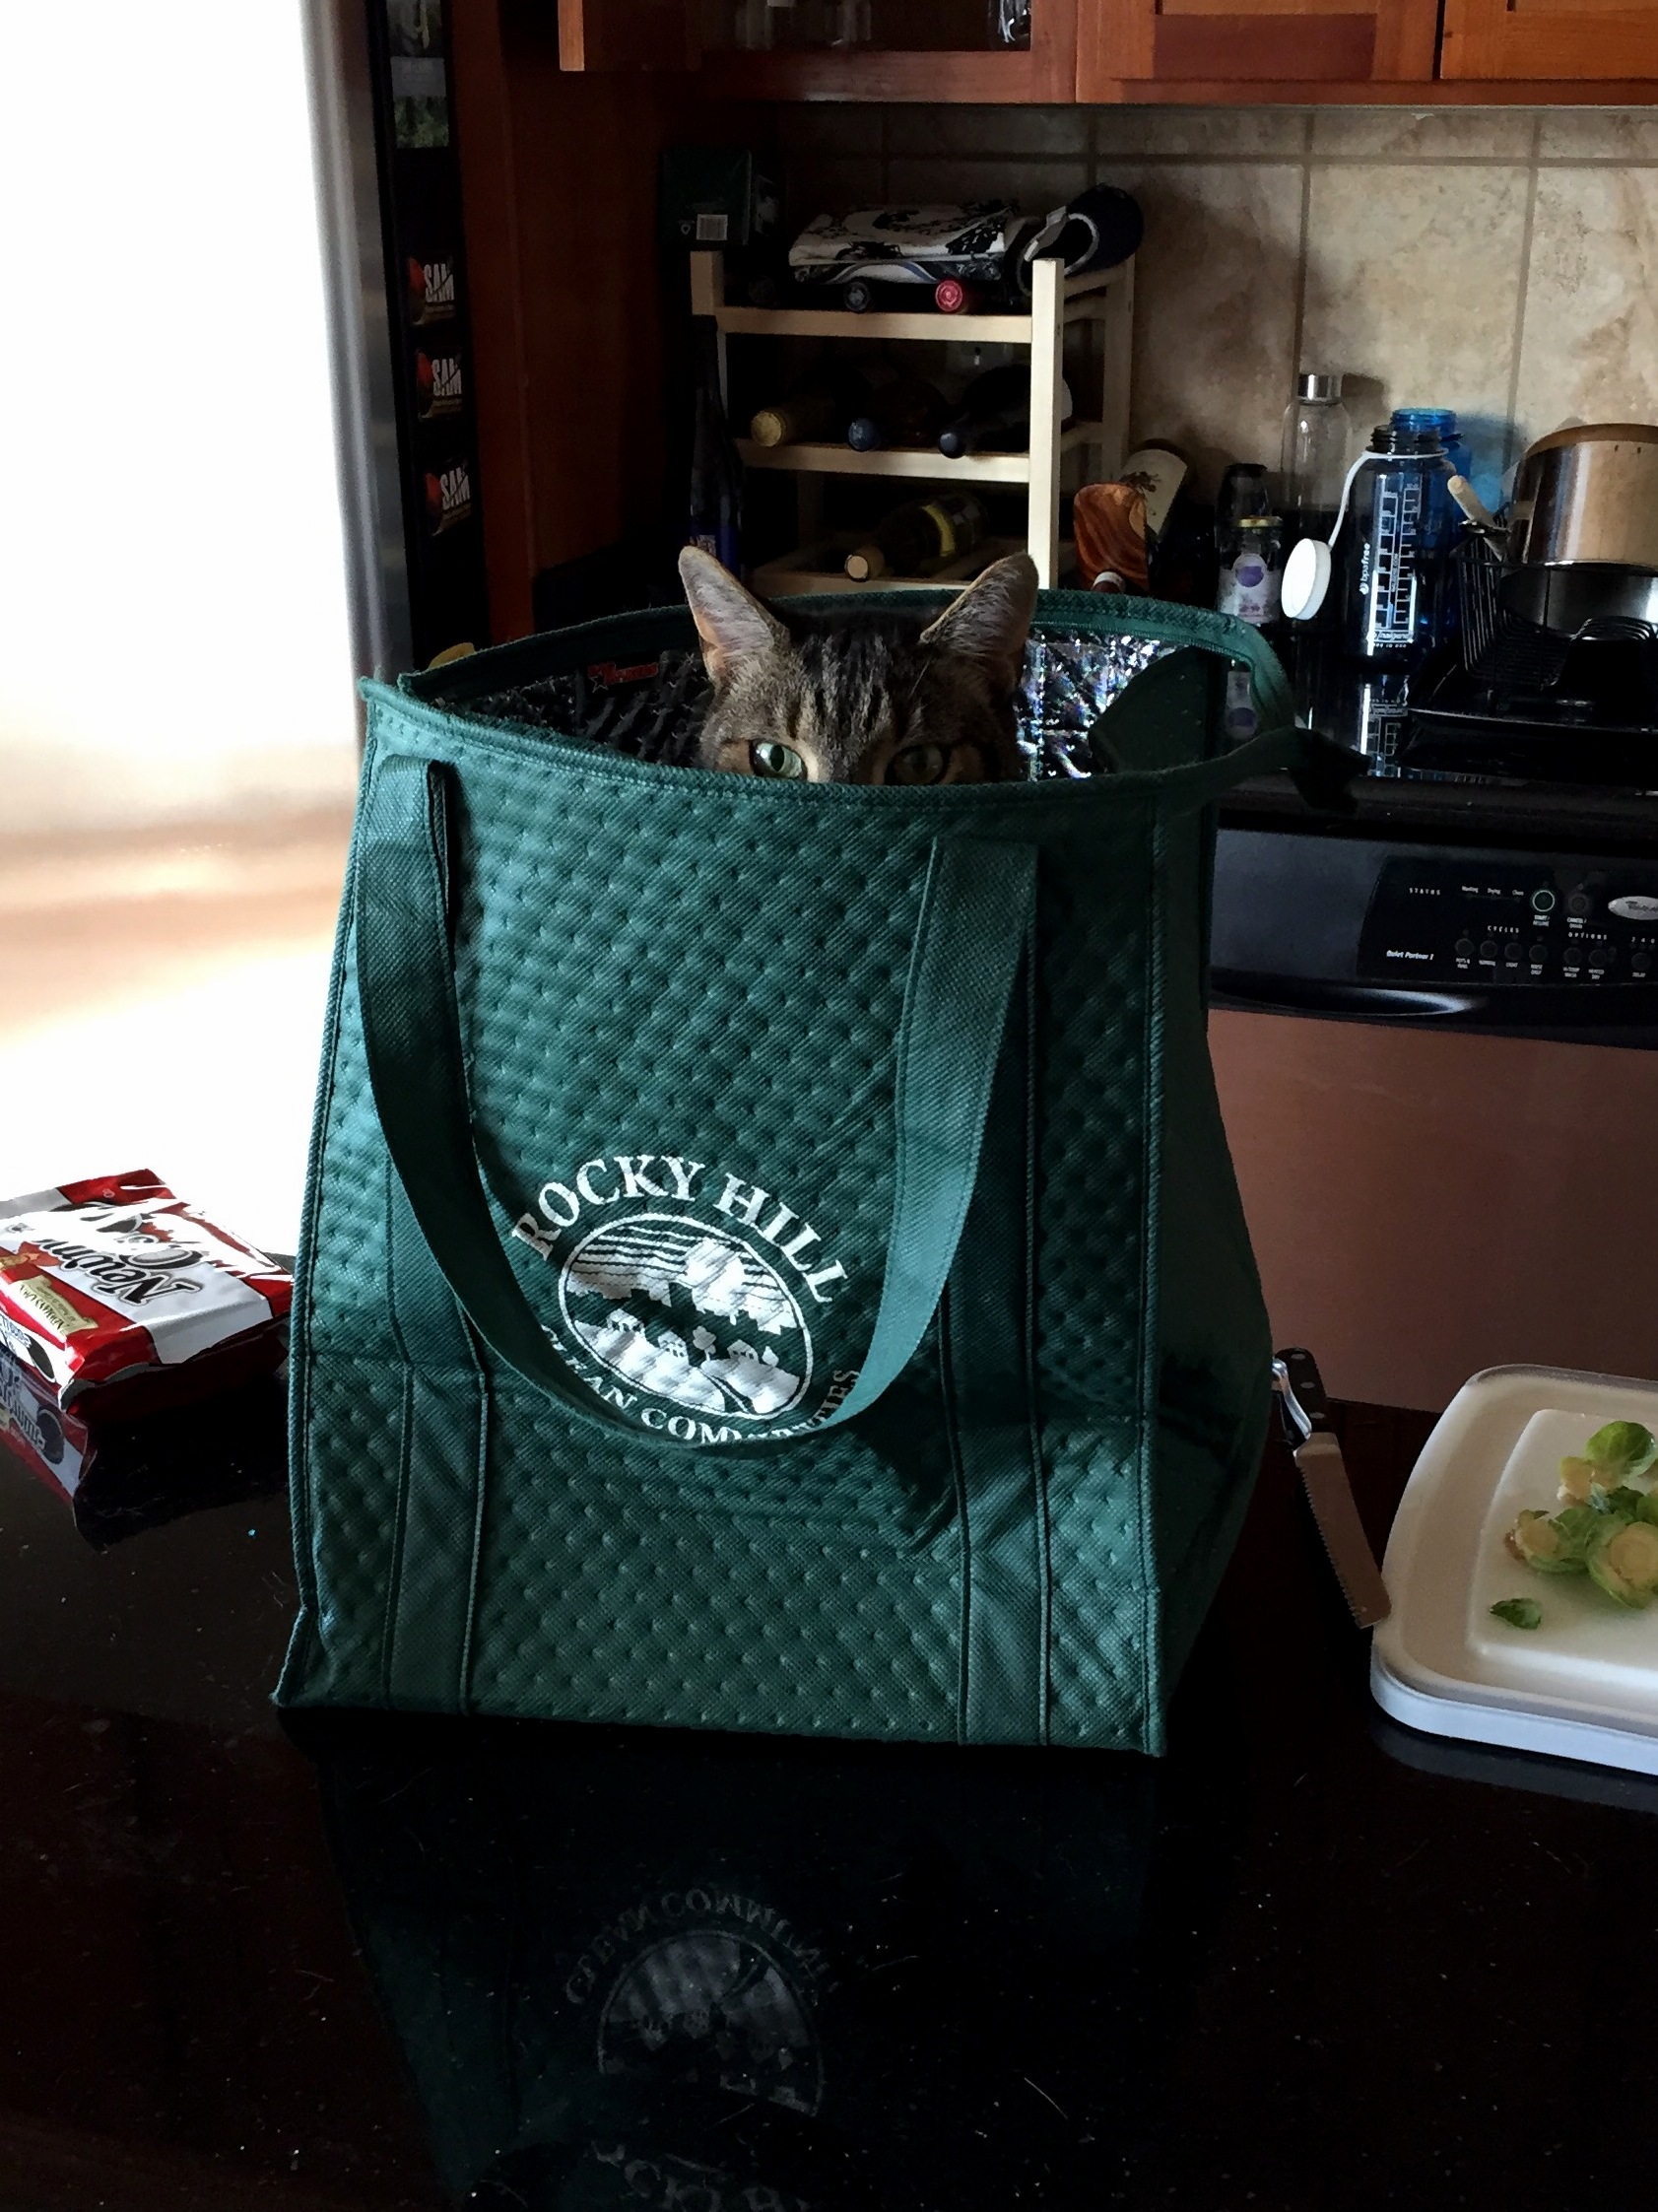 Helping with the groceries